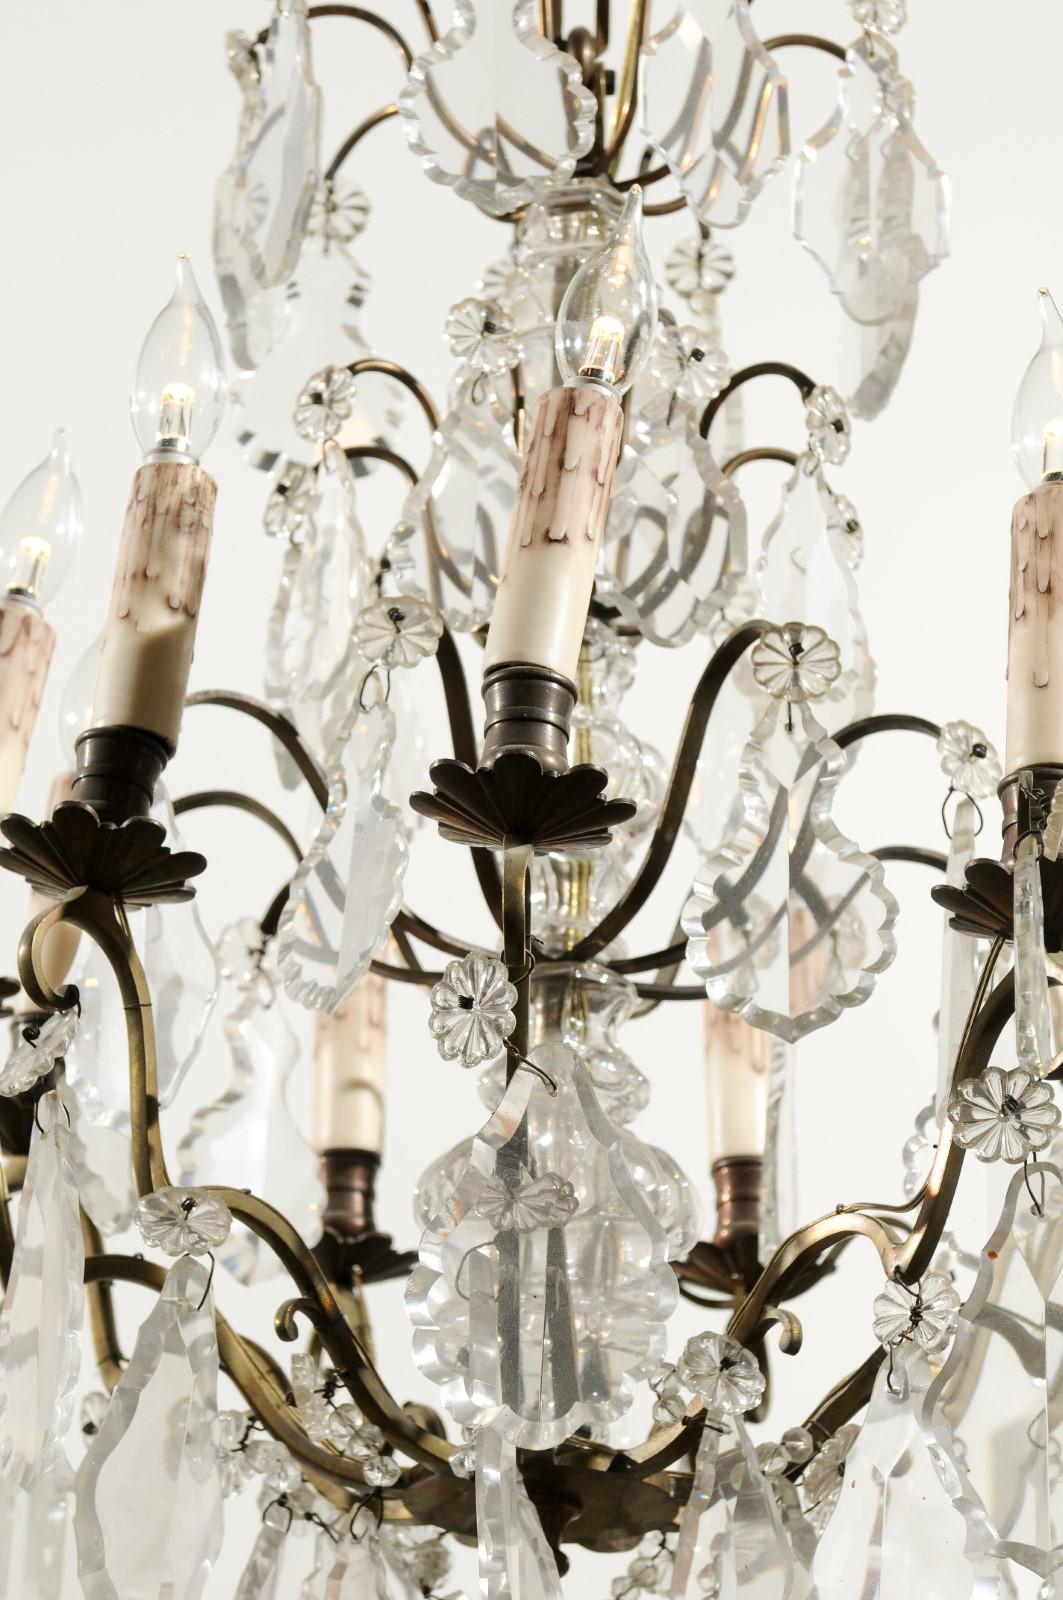 A French nine-light crystal chandelier from the early 20th century, with brass armature and flower-shaped bobèches. Born in France during the Belle-Époque era, this exquisite chandelier features a brass scrolling armature, adorned with large